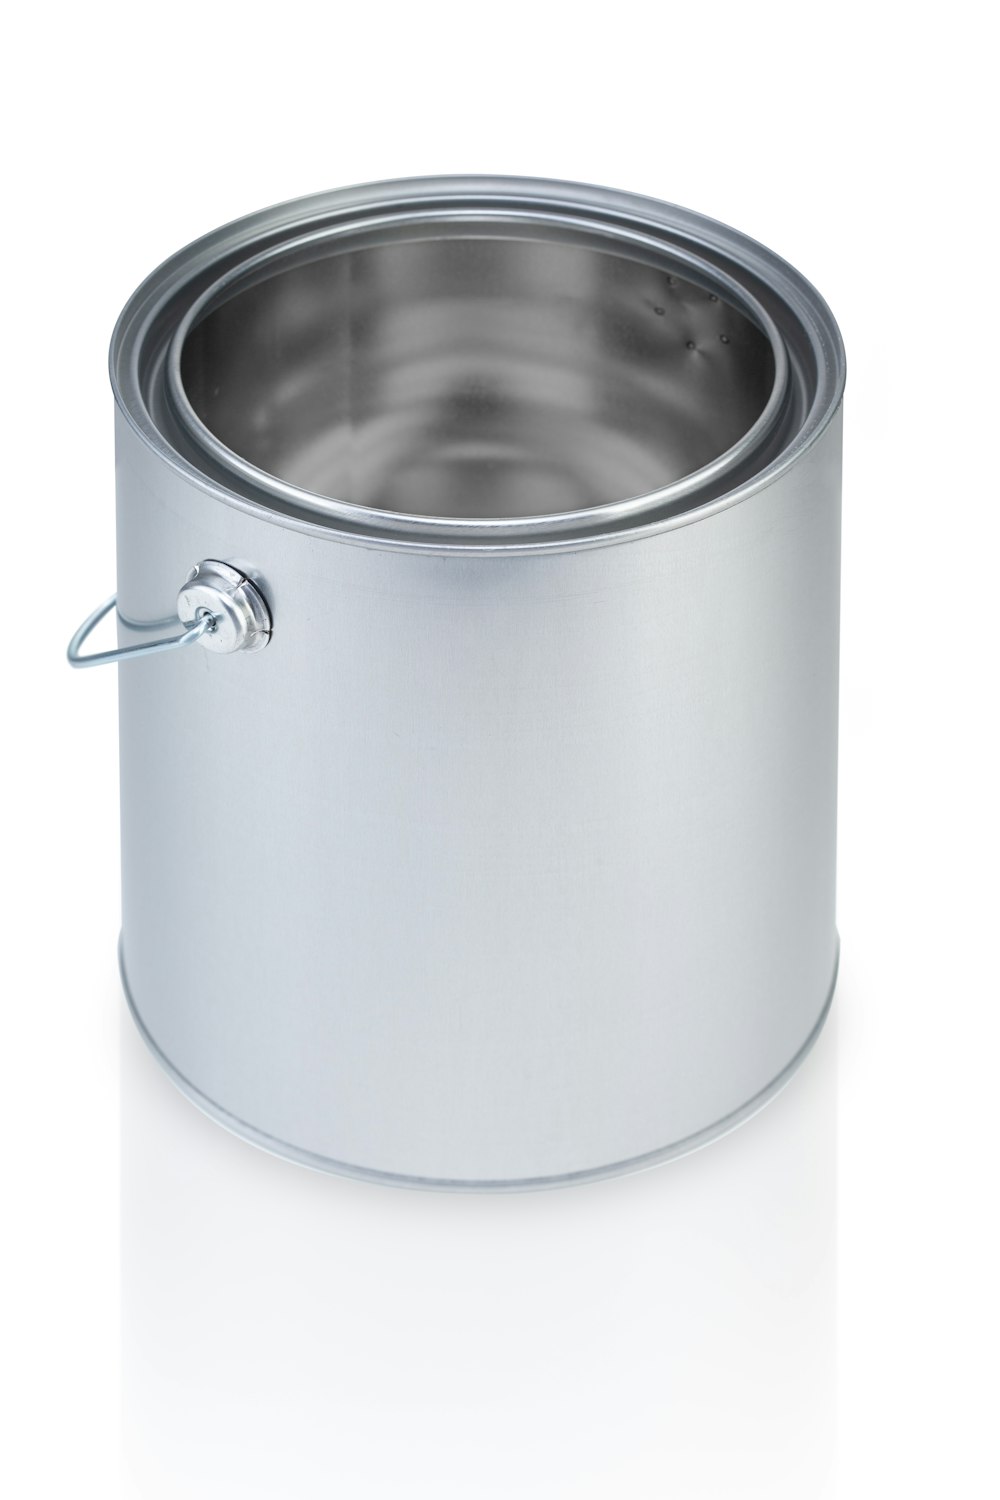 stainless steel round container with handle